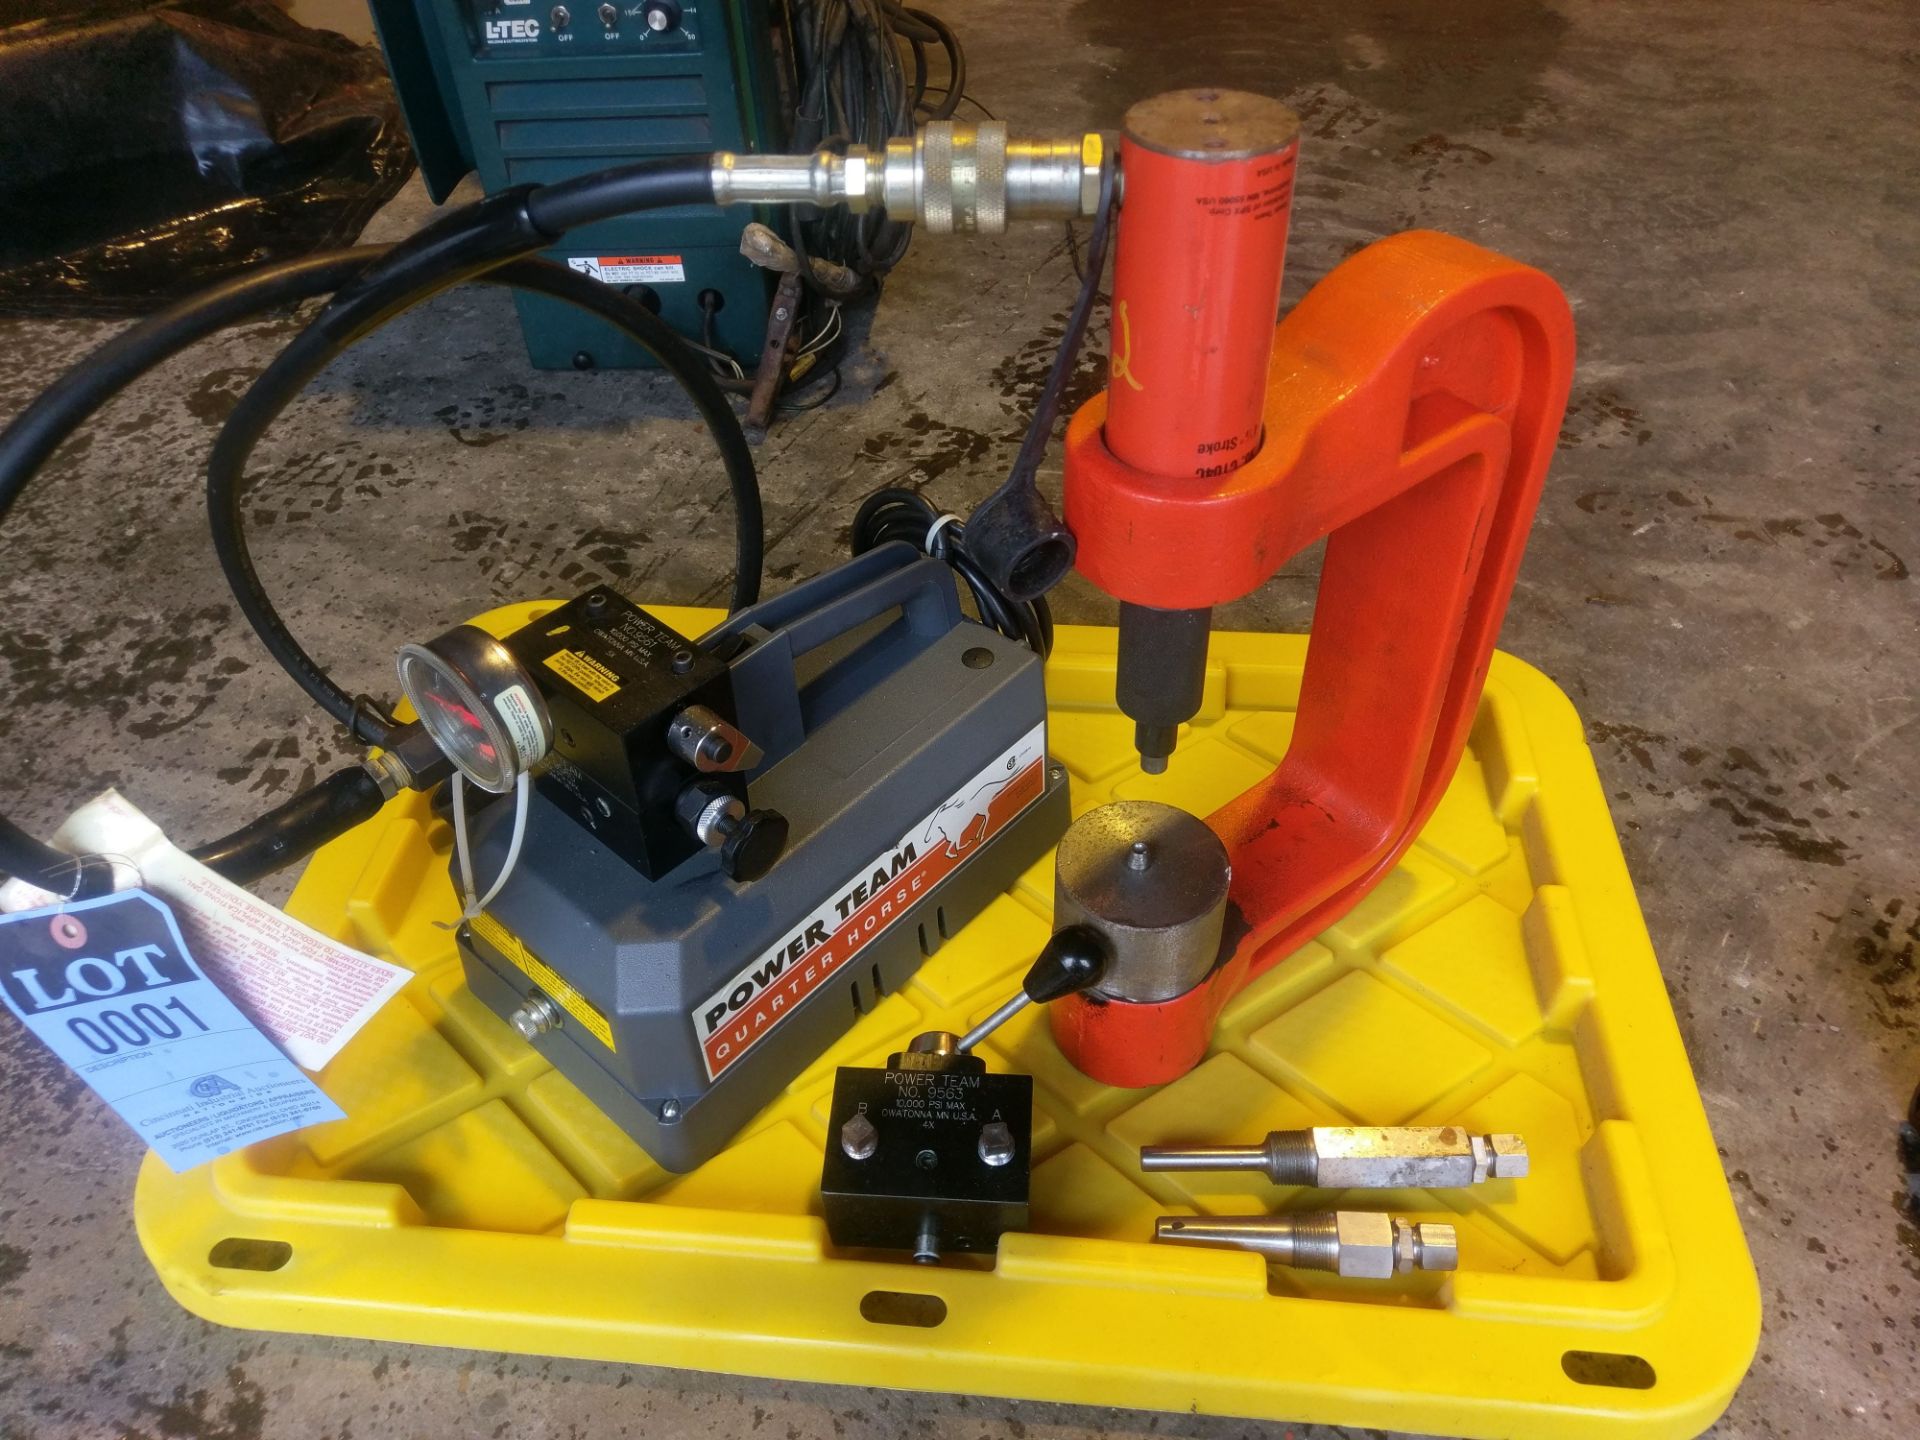 POWER TEAM C-FRAME HYDRAULIC PUNCH WITH 10,000 PSI POWER TEAM NO. 9561 ELECTRIC "QUARTER HORSE"